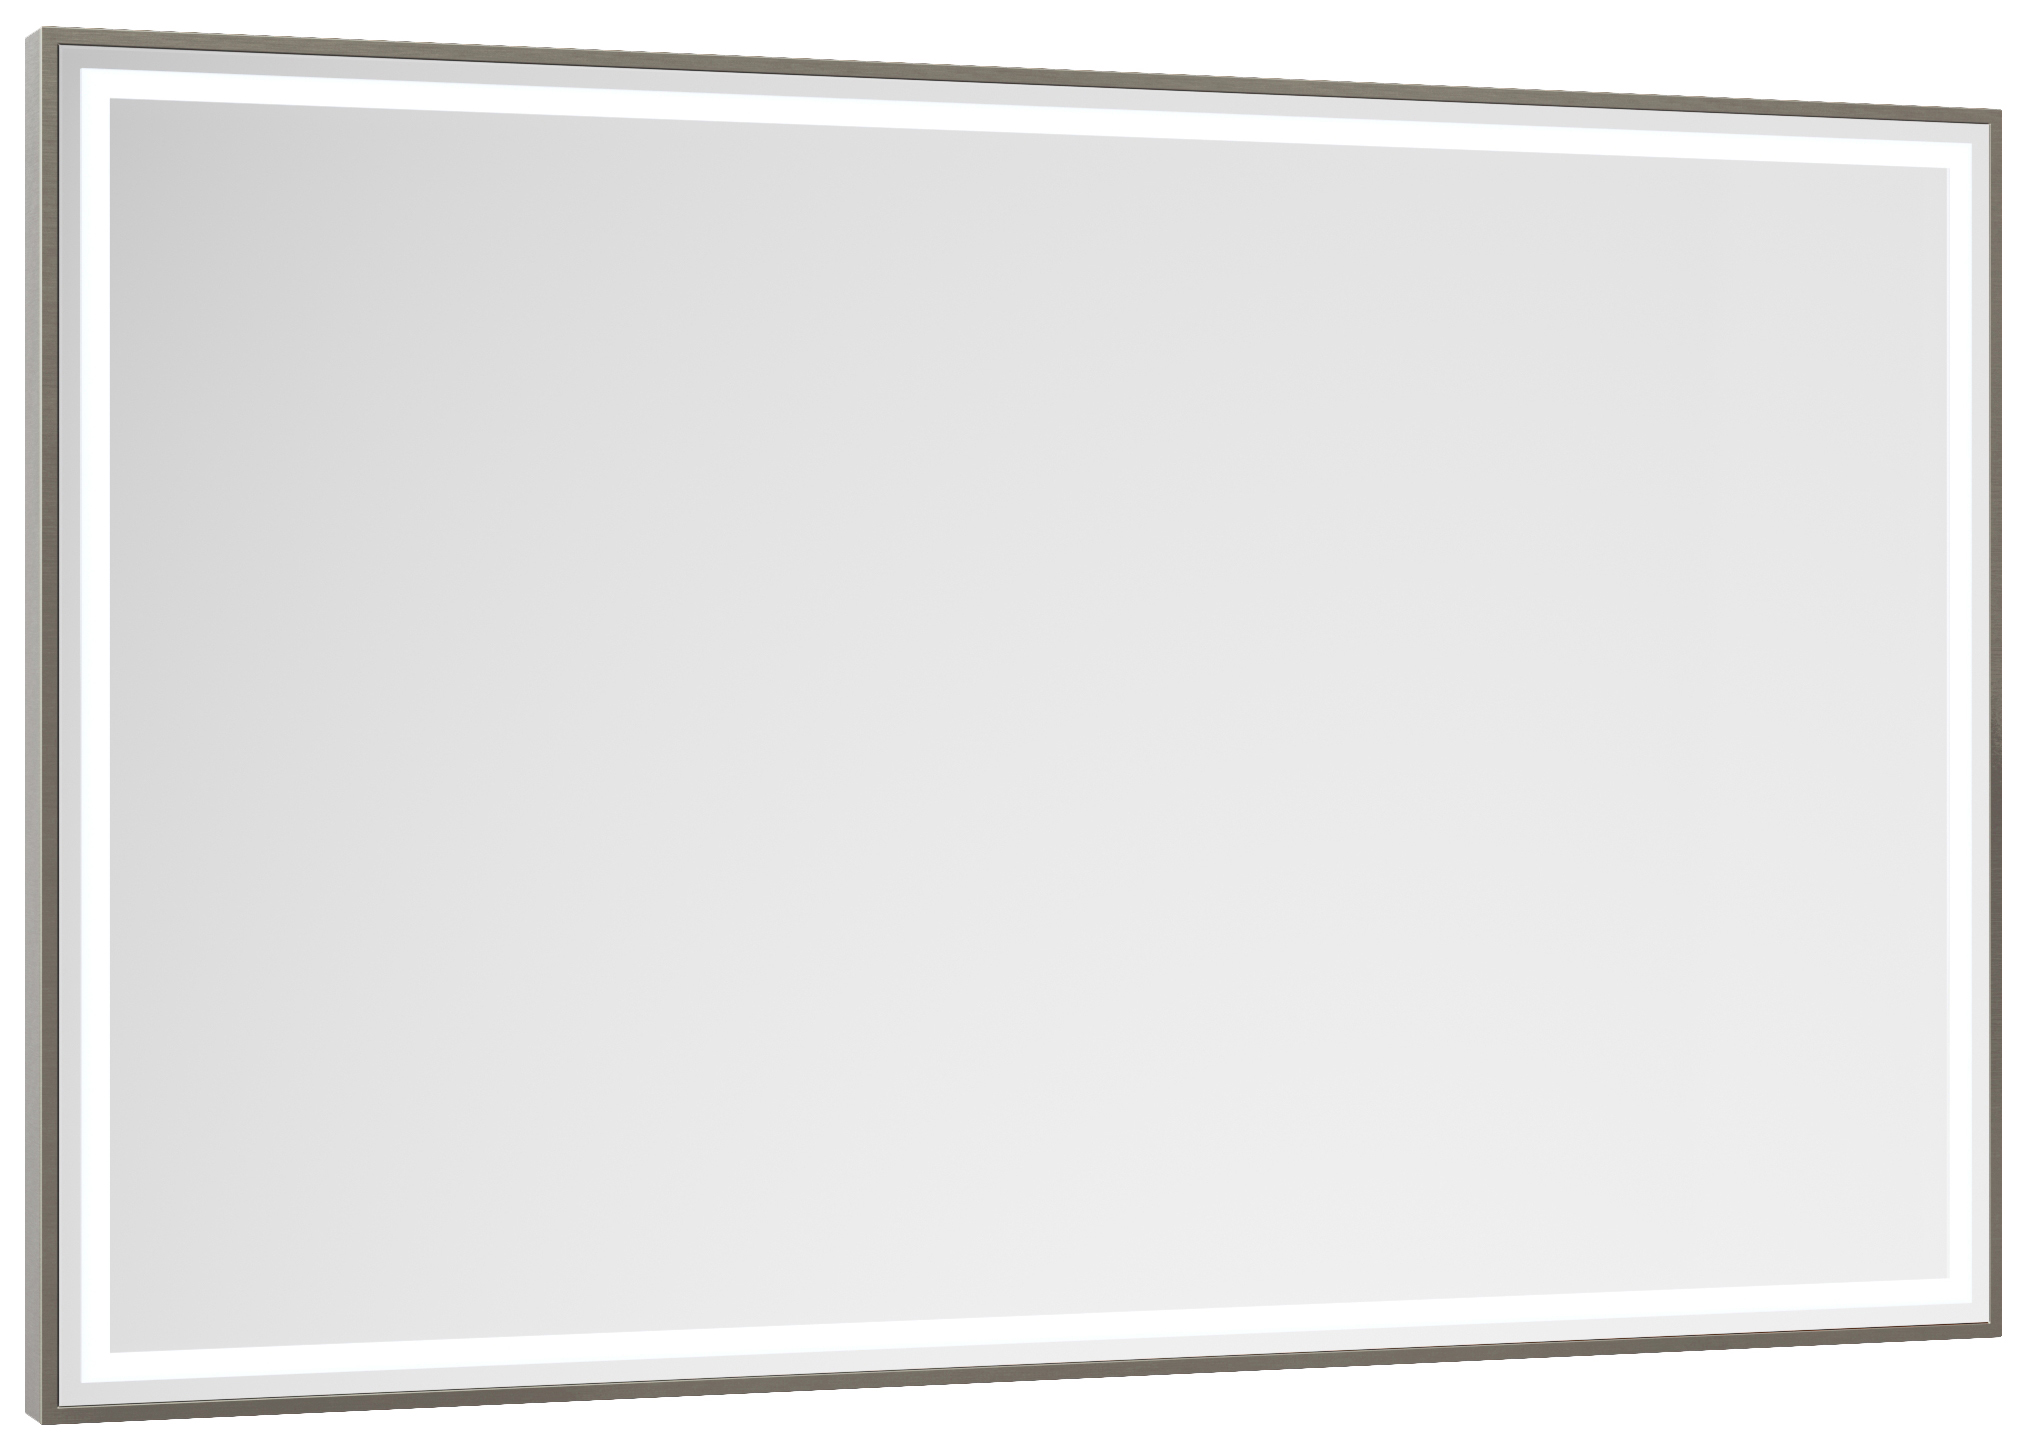 Image of Abacus Melford Silver LED Mirror with Demister - 1200 x 600mm